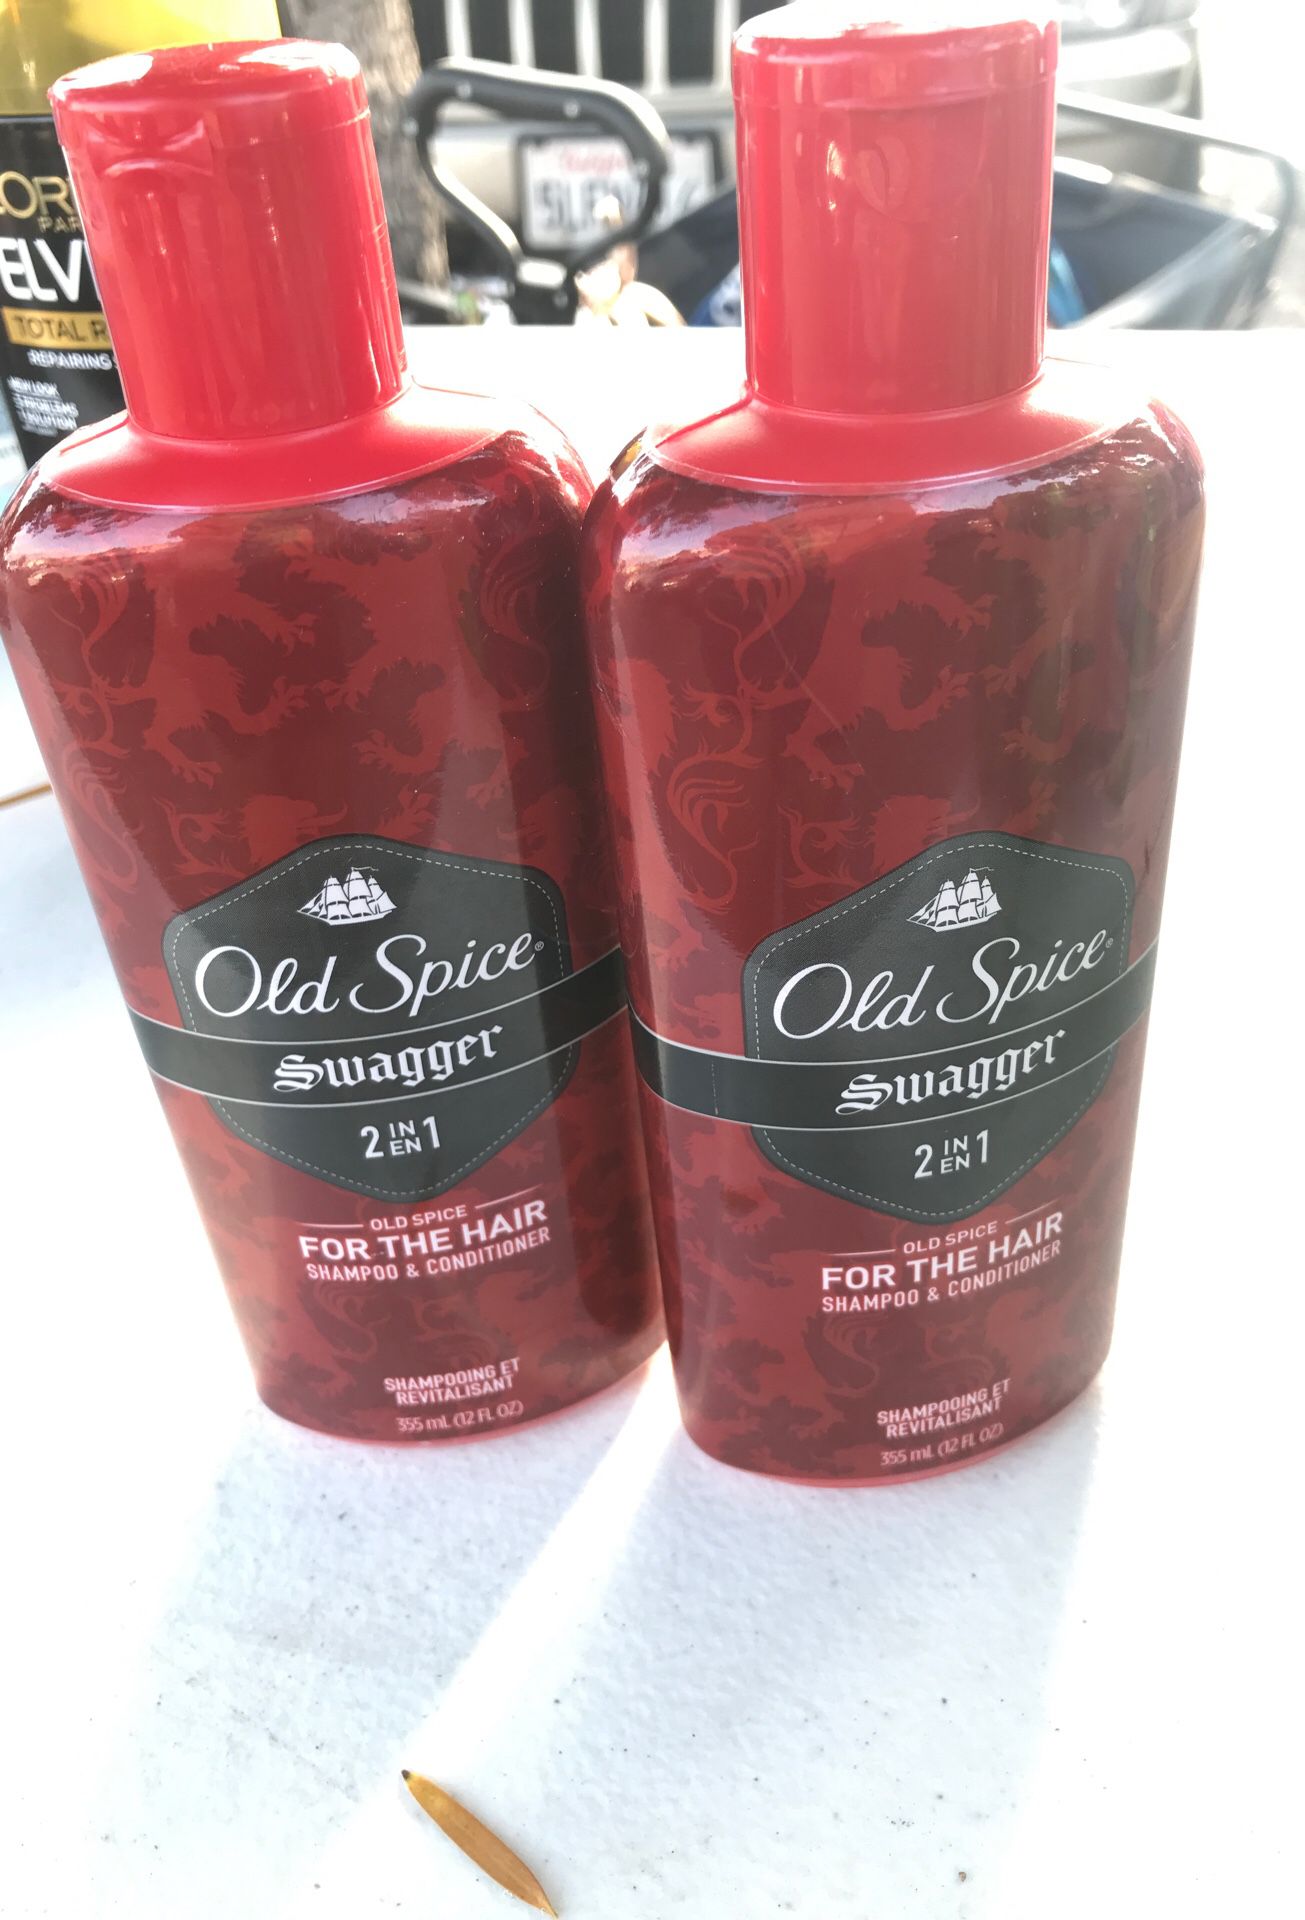 Old spice swagger 2 in 1 Shampoo & Conditioner